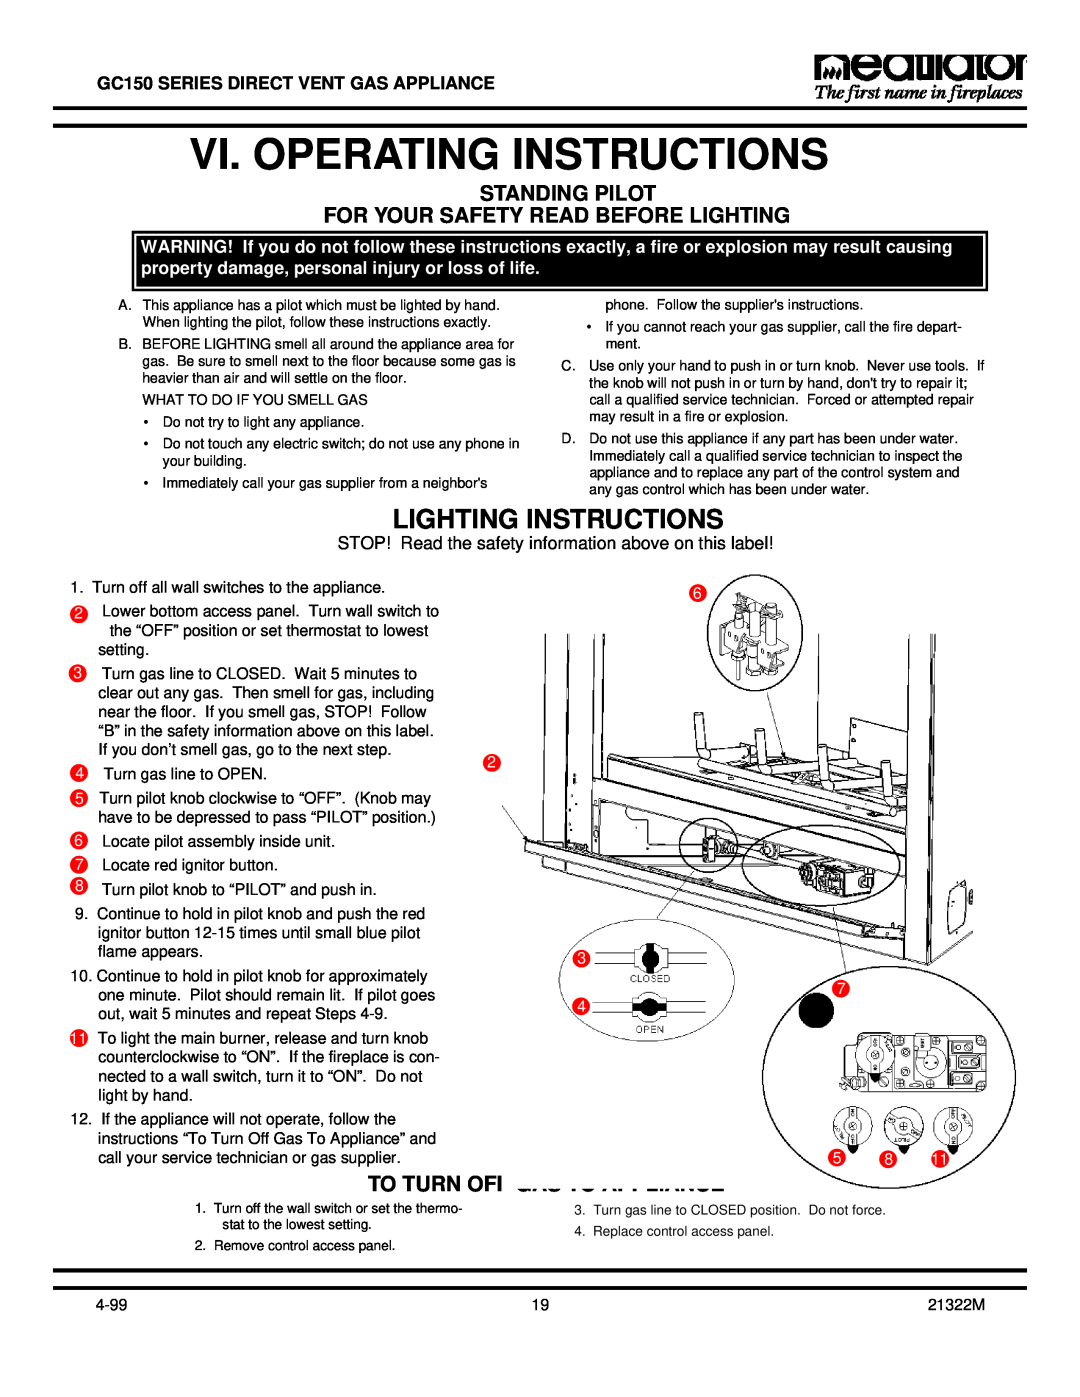 Heatiator GC150 Vi. Operating Instructions, Lighting Instructions, Standing Pilot, For Your Safety Read Before Lighting 